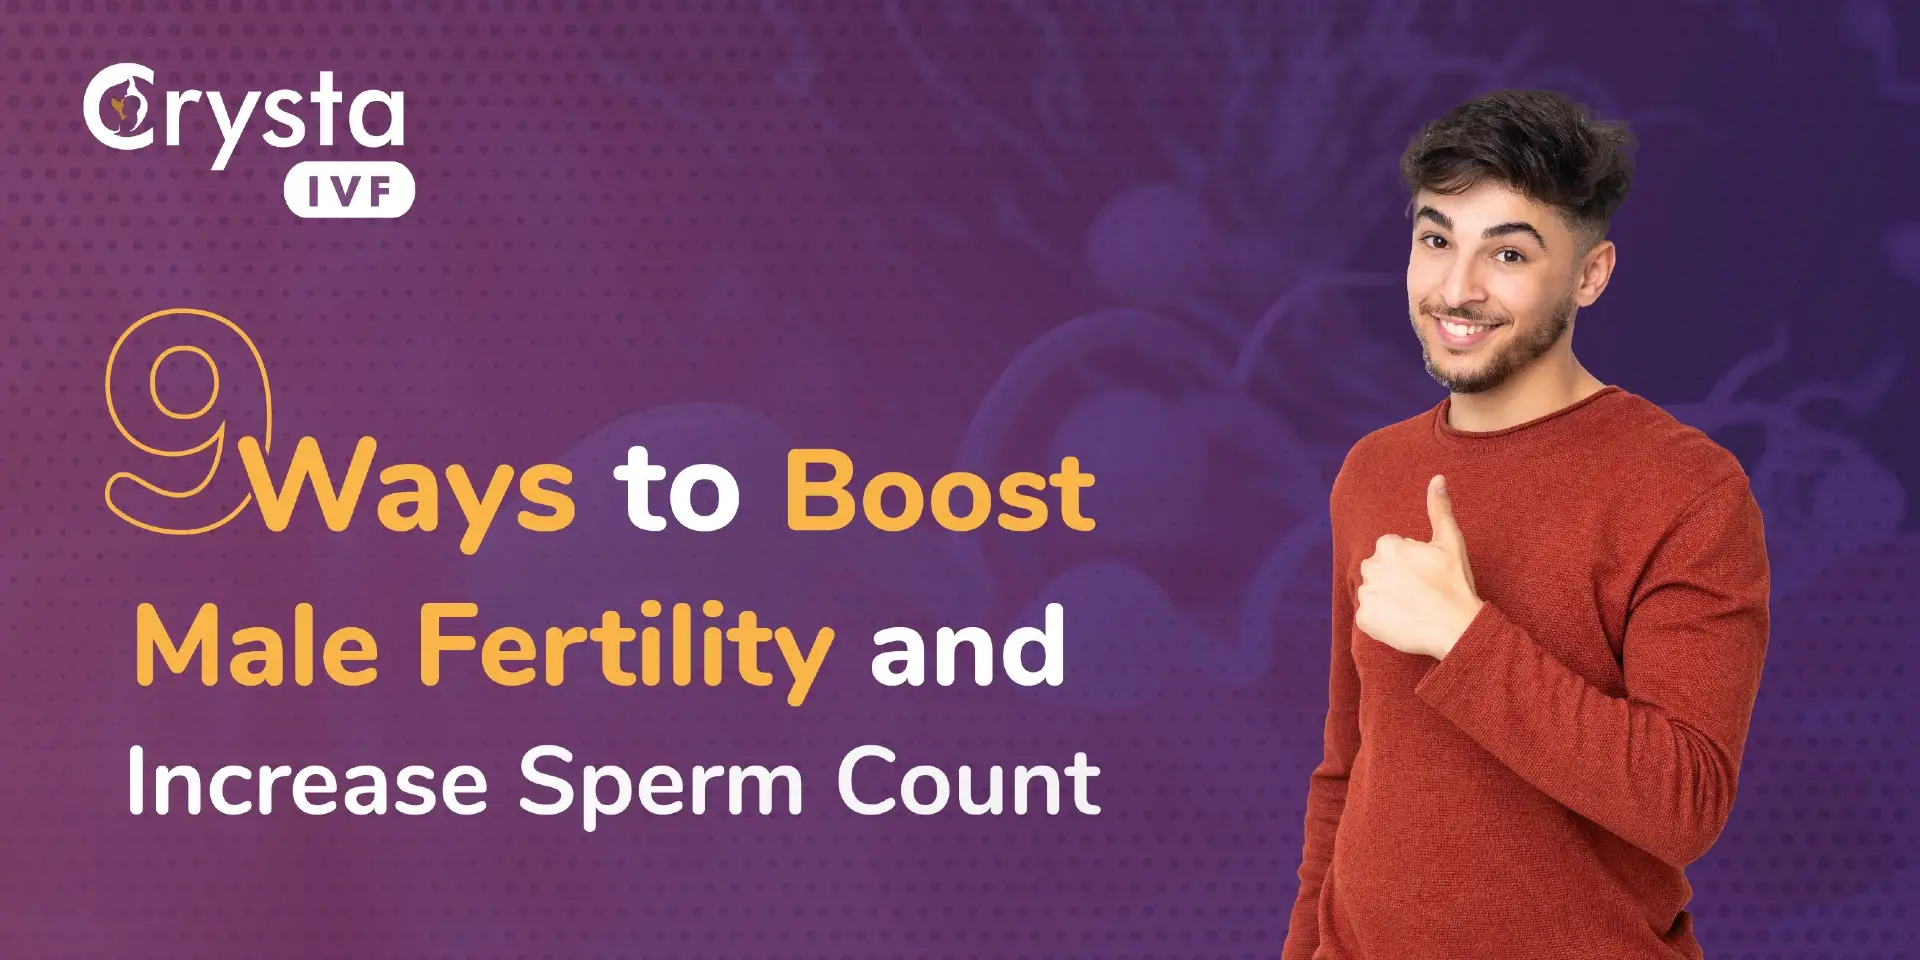 You are currently viewing 9 Ways to Boost Male Fertility and Increase Sperm Count